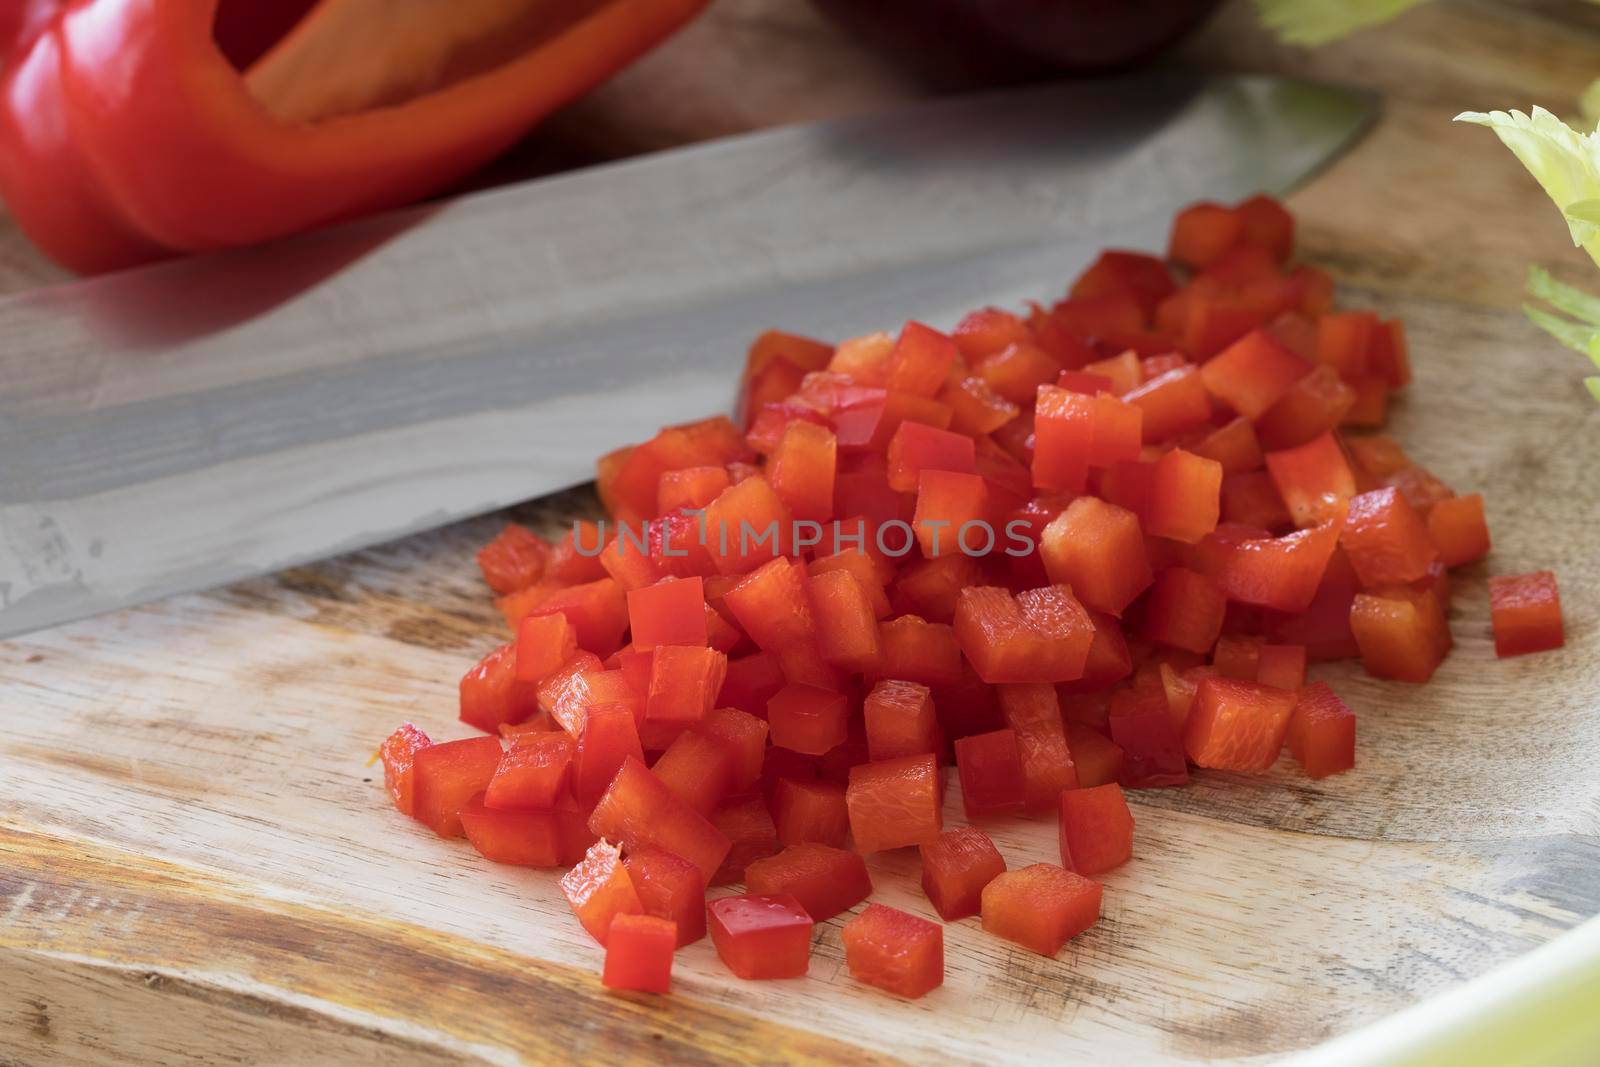 Diced red bell peppers on cutting board.